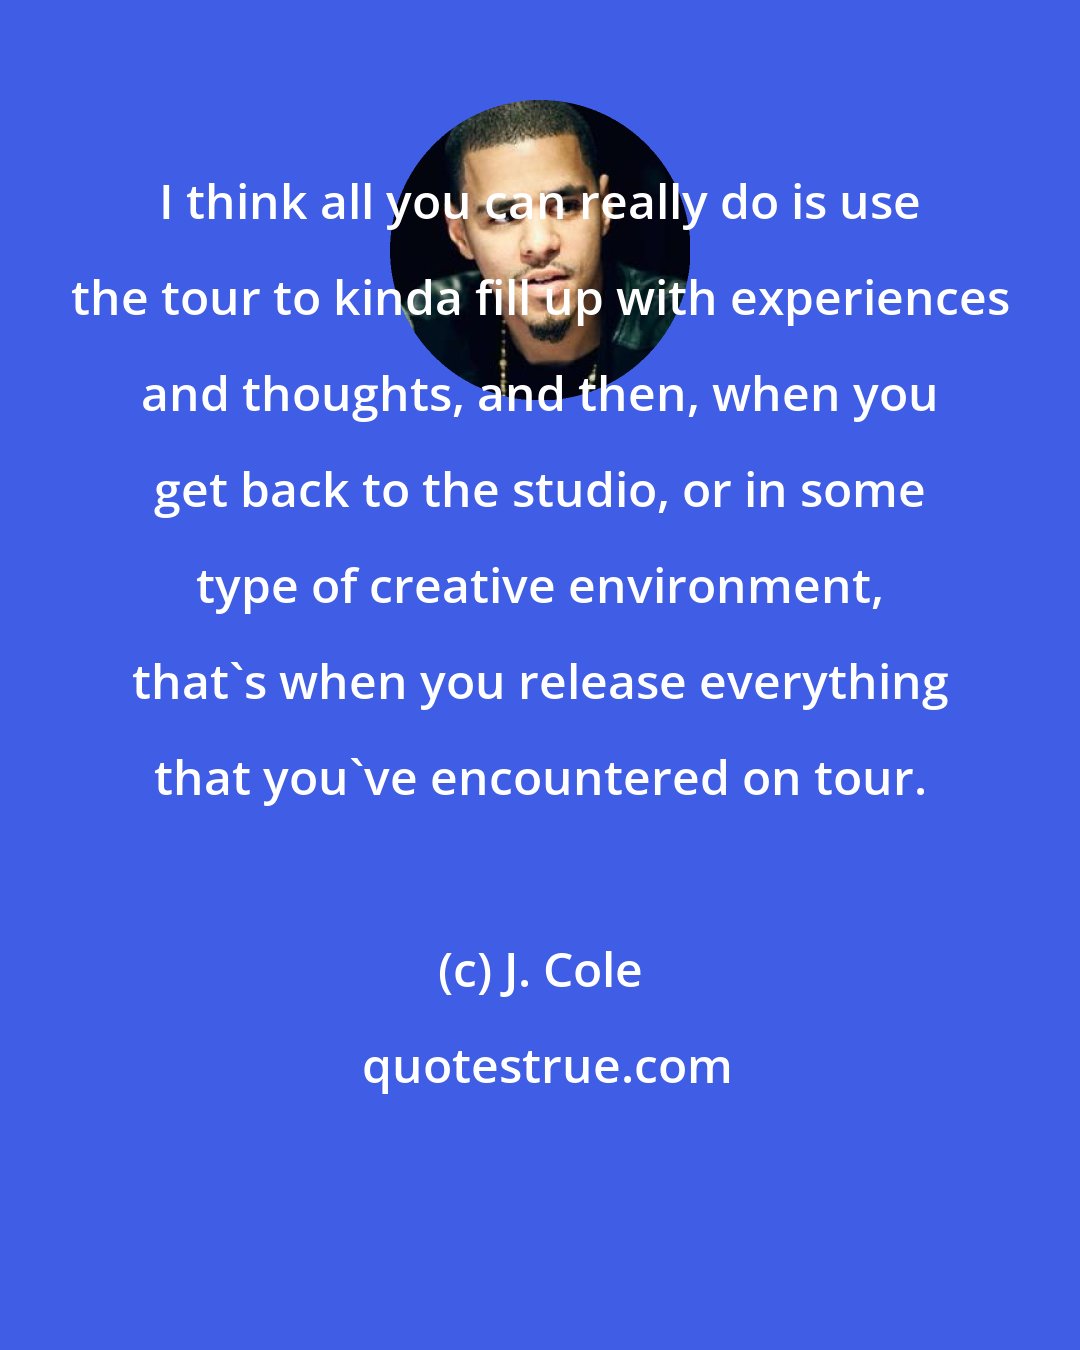 J. Cole: I think all you can really do is use the tour to kinda fill up with experiences and thoughts, and then, when you get back to the studio, or in some type of creative environment, that's when you release everything that you've encountered on tour.